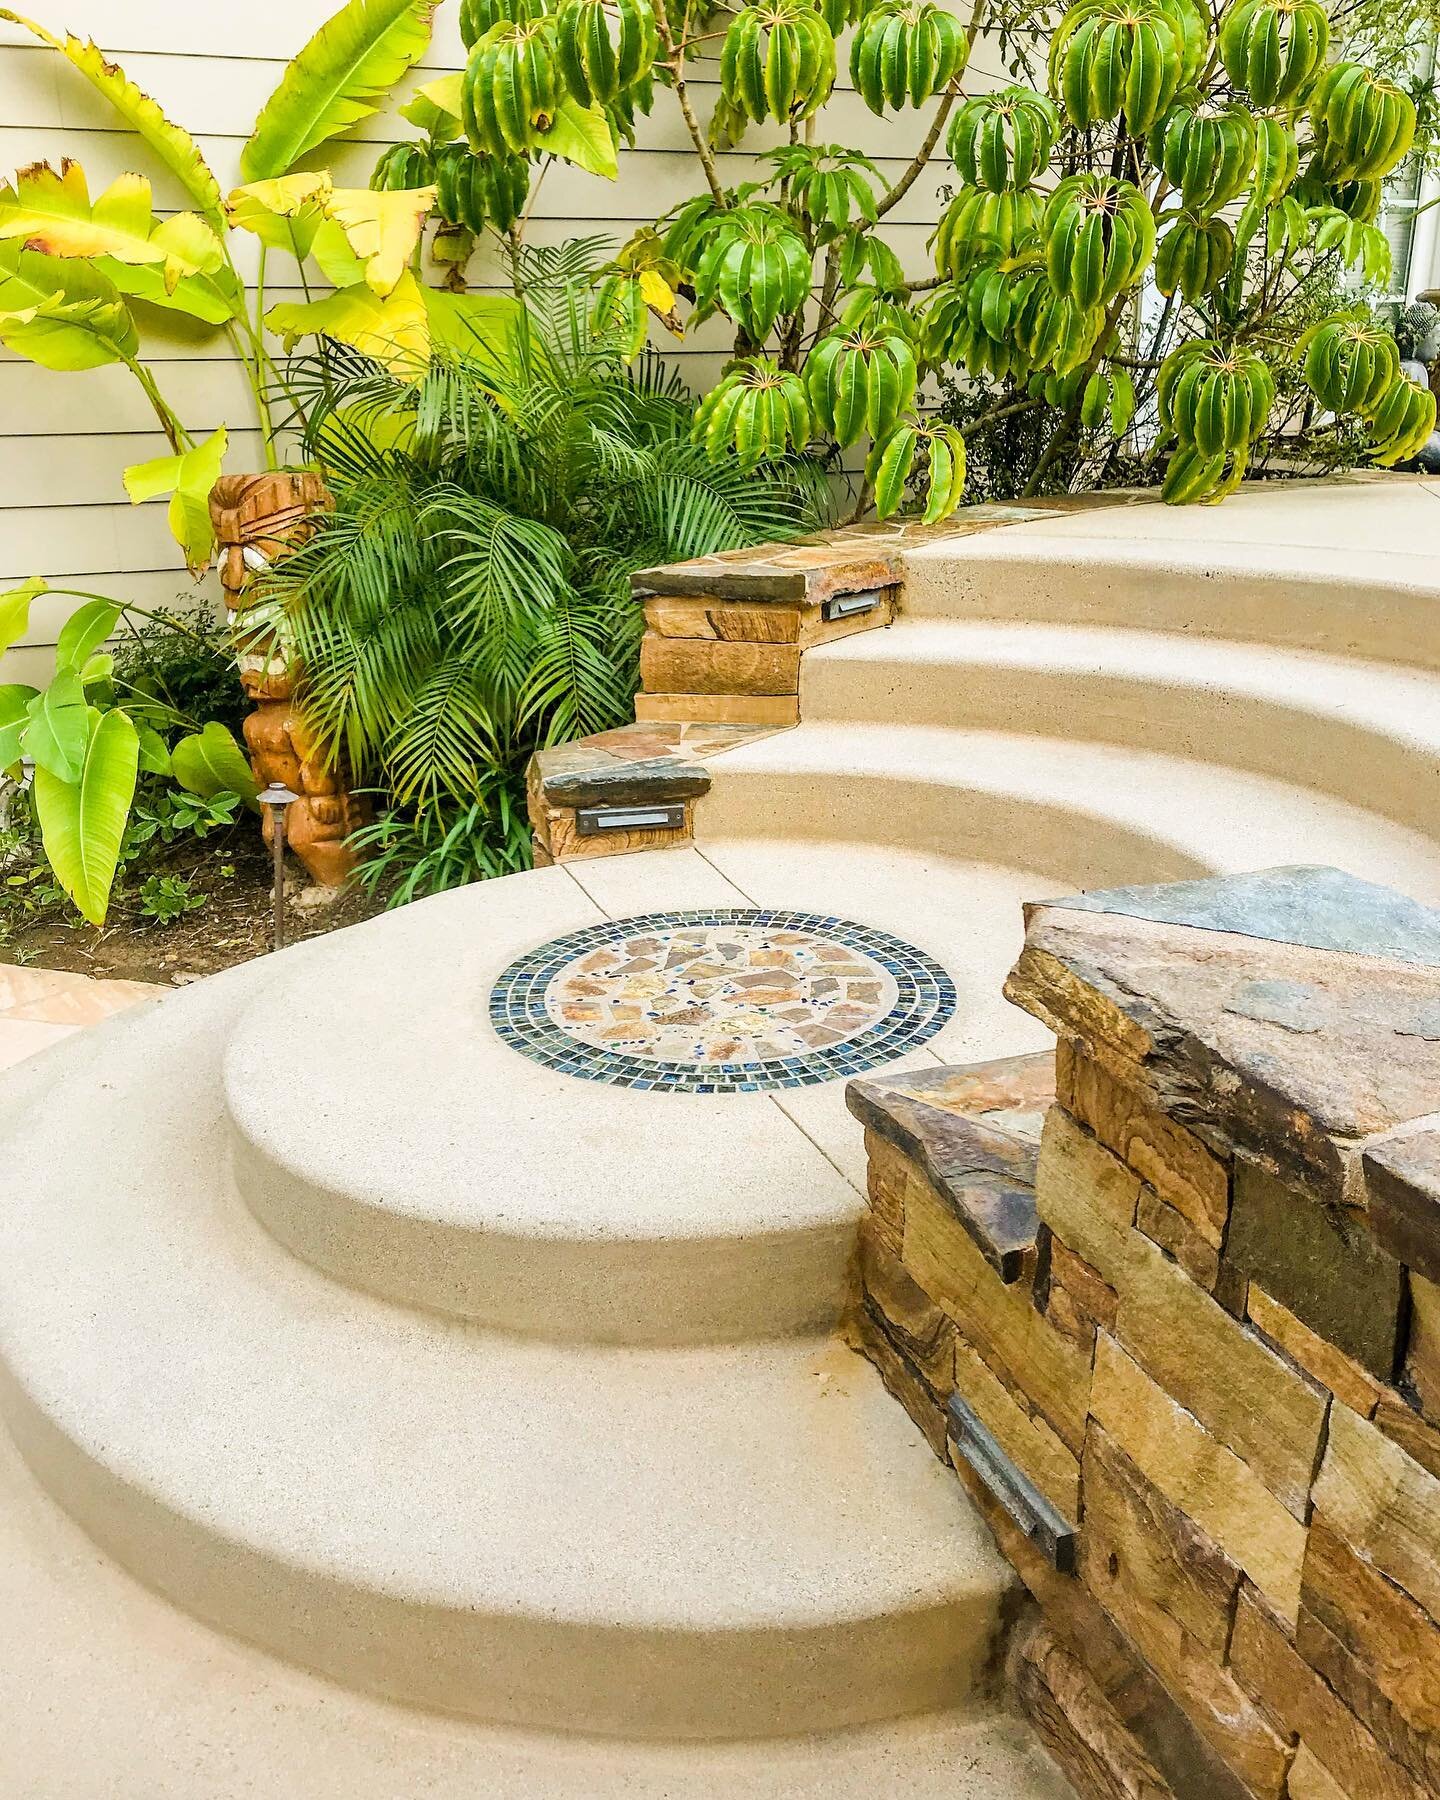 Often times outdoor spaces can be defined by simple elements brought together by nature 🌿🌴🍃 - like these stacked stoned steps topped with a custom-designed mosaic and surrounded by tropical-styled landscaping. ⁣⁣
⁣⁣
Authenticity & personality are 